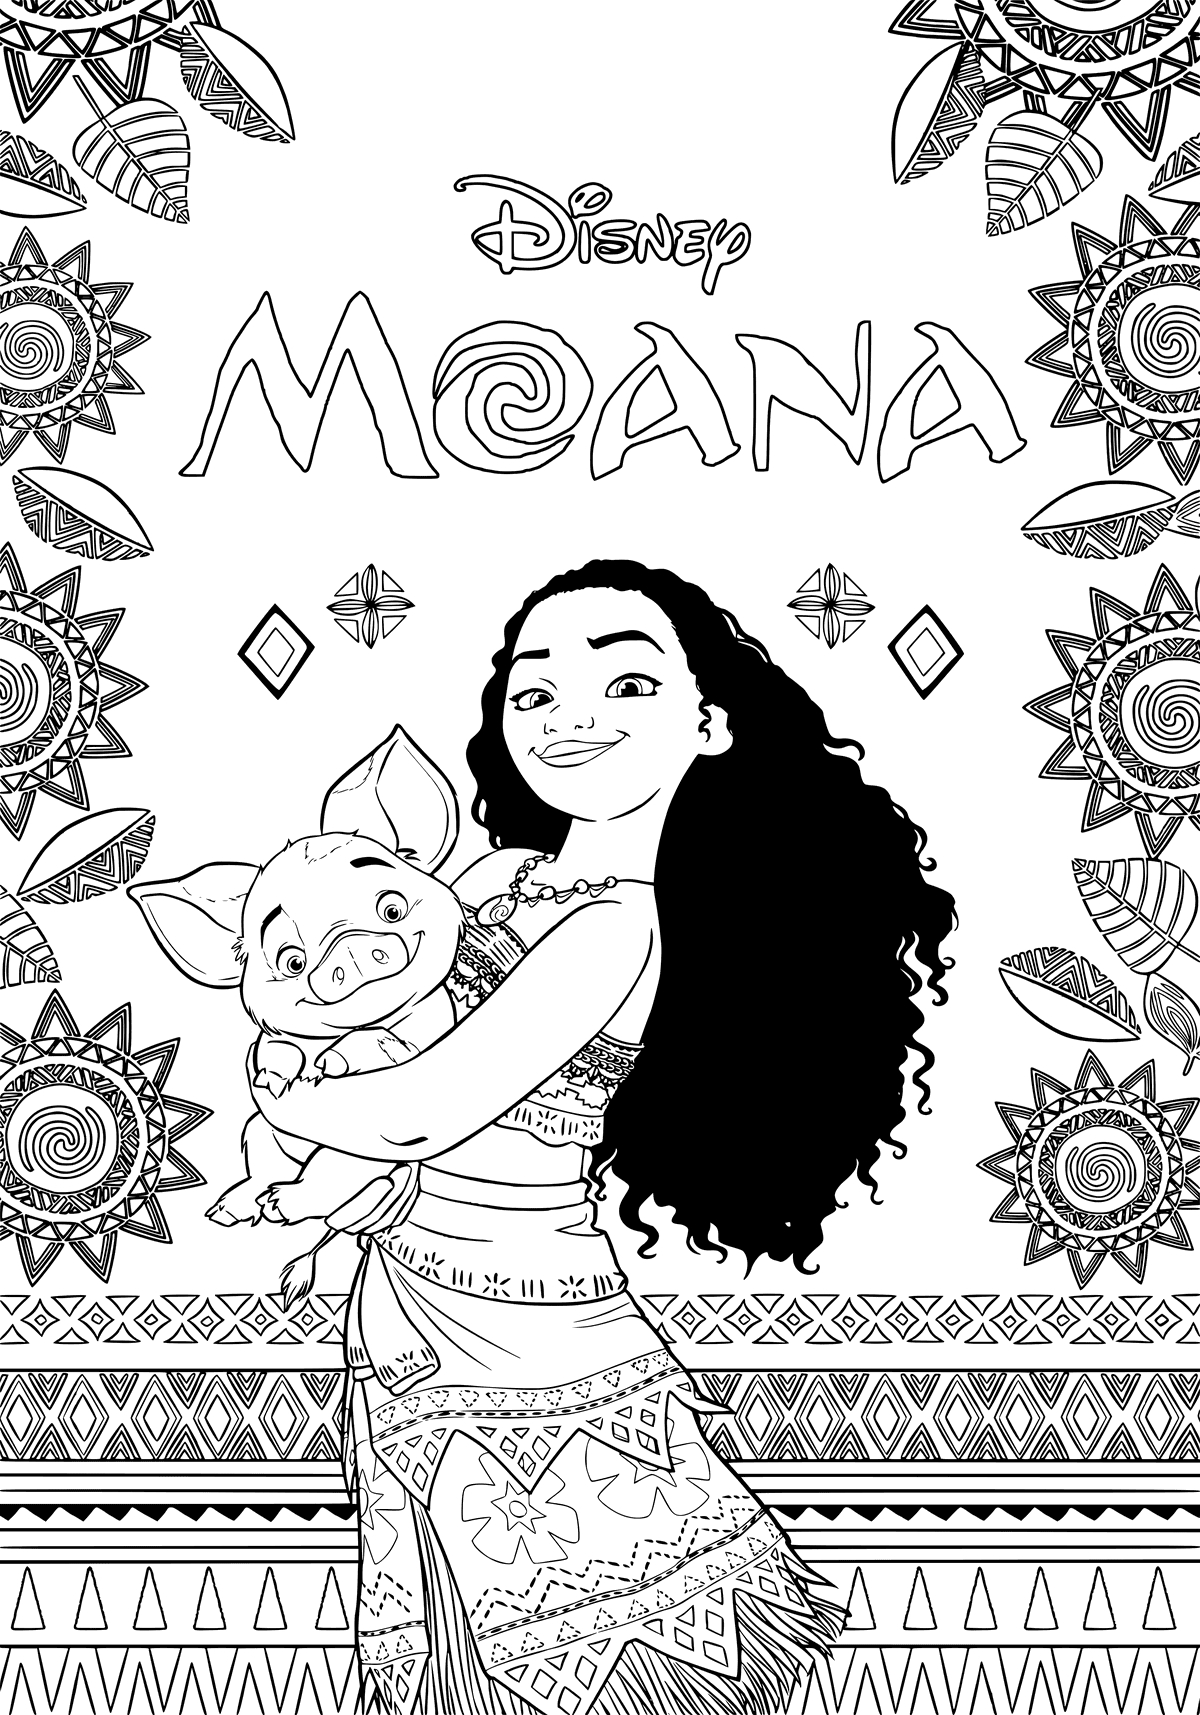 Moana Coloring Pages - Best Coloring Pages For Kids - Moana Coloring Pages Free Printable